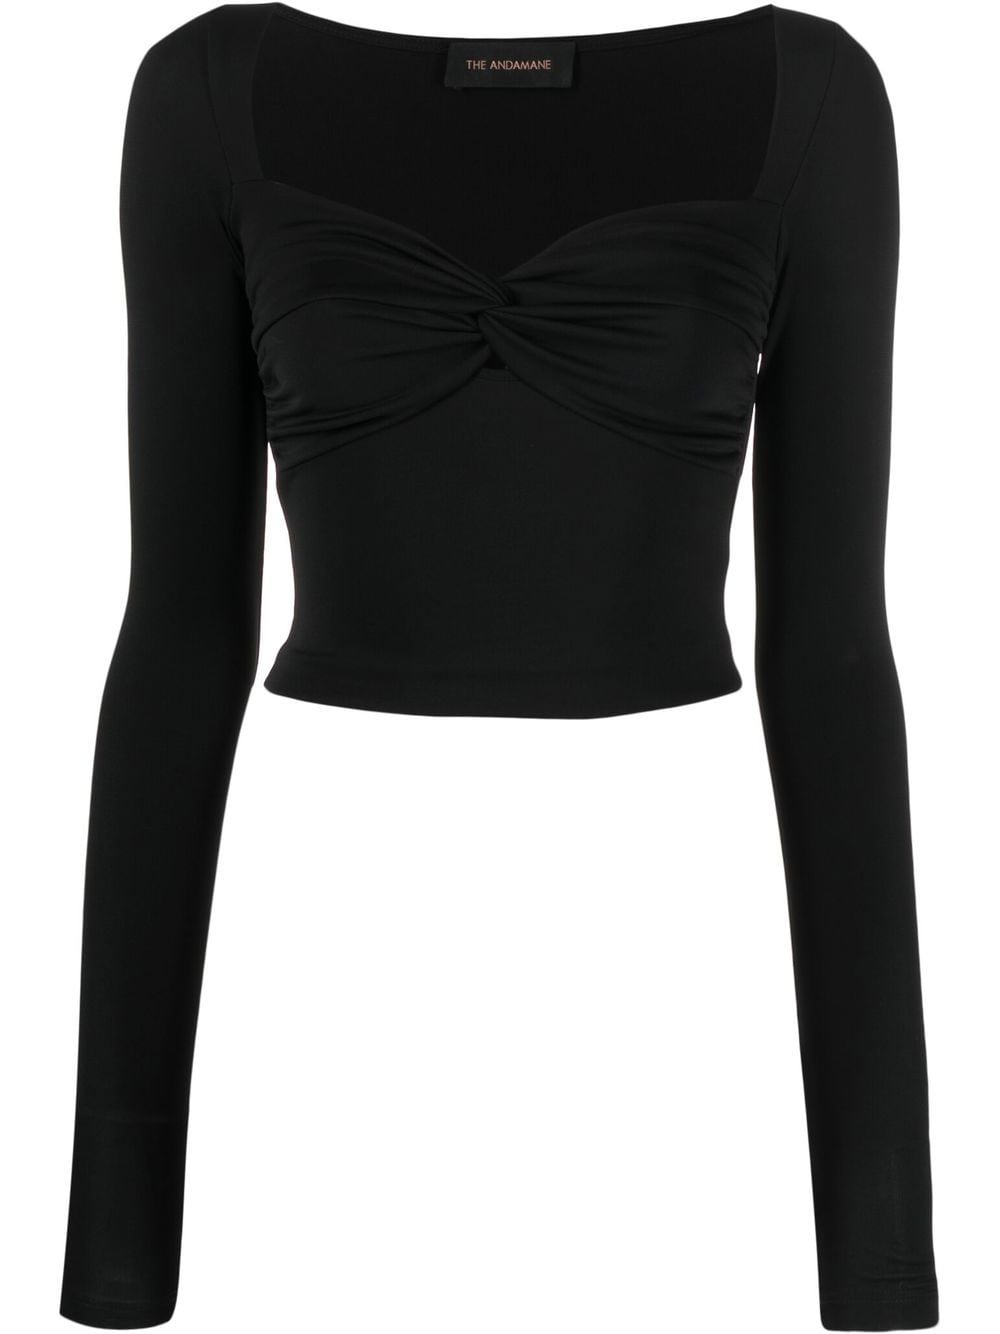 THE ANDAMANE knot-detail long-sleeved top - Black von THE ANDAMANE